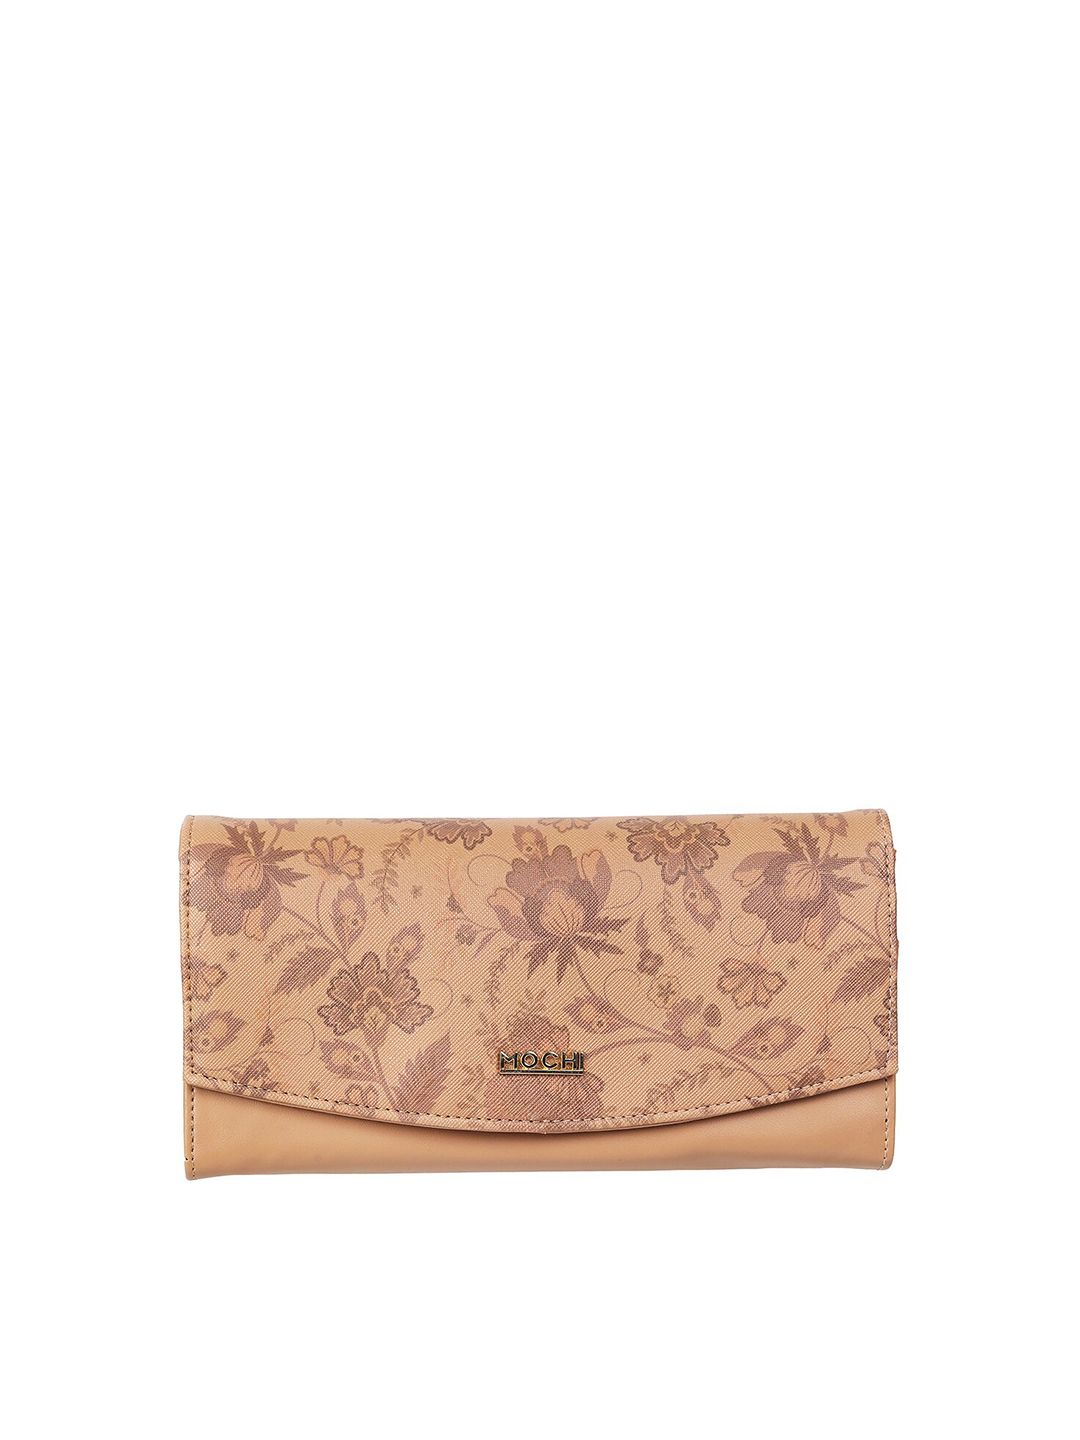 Mochi Women Tan & Gold-Toned Floral Printed Envelope Price in India